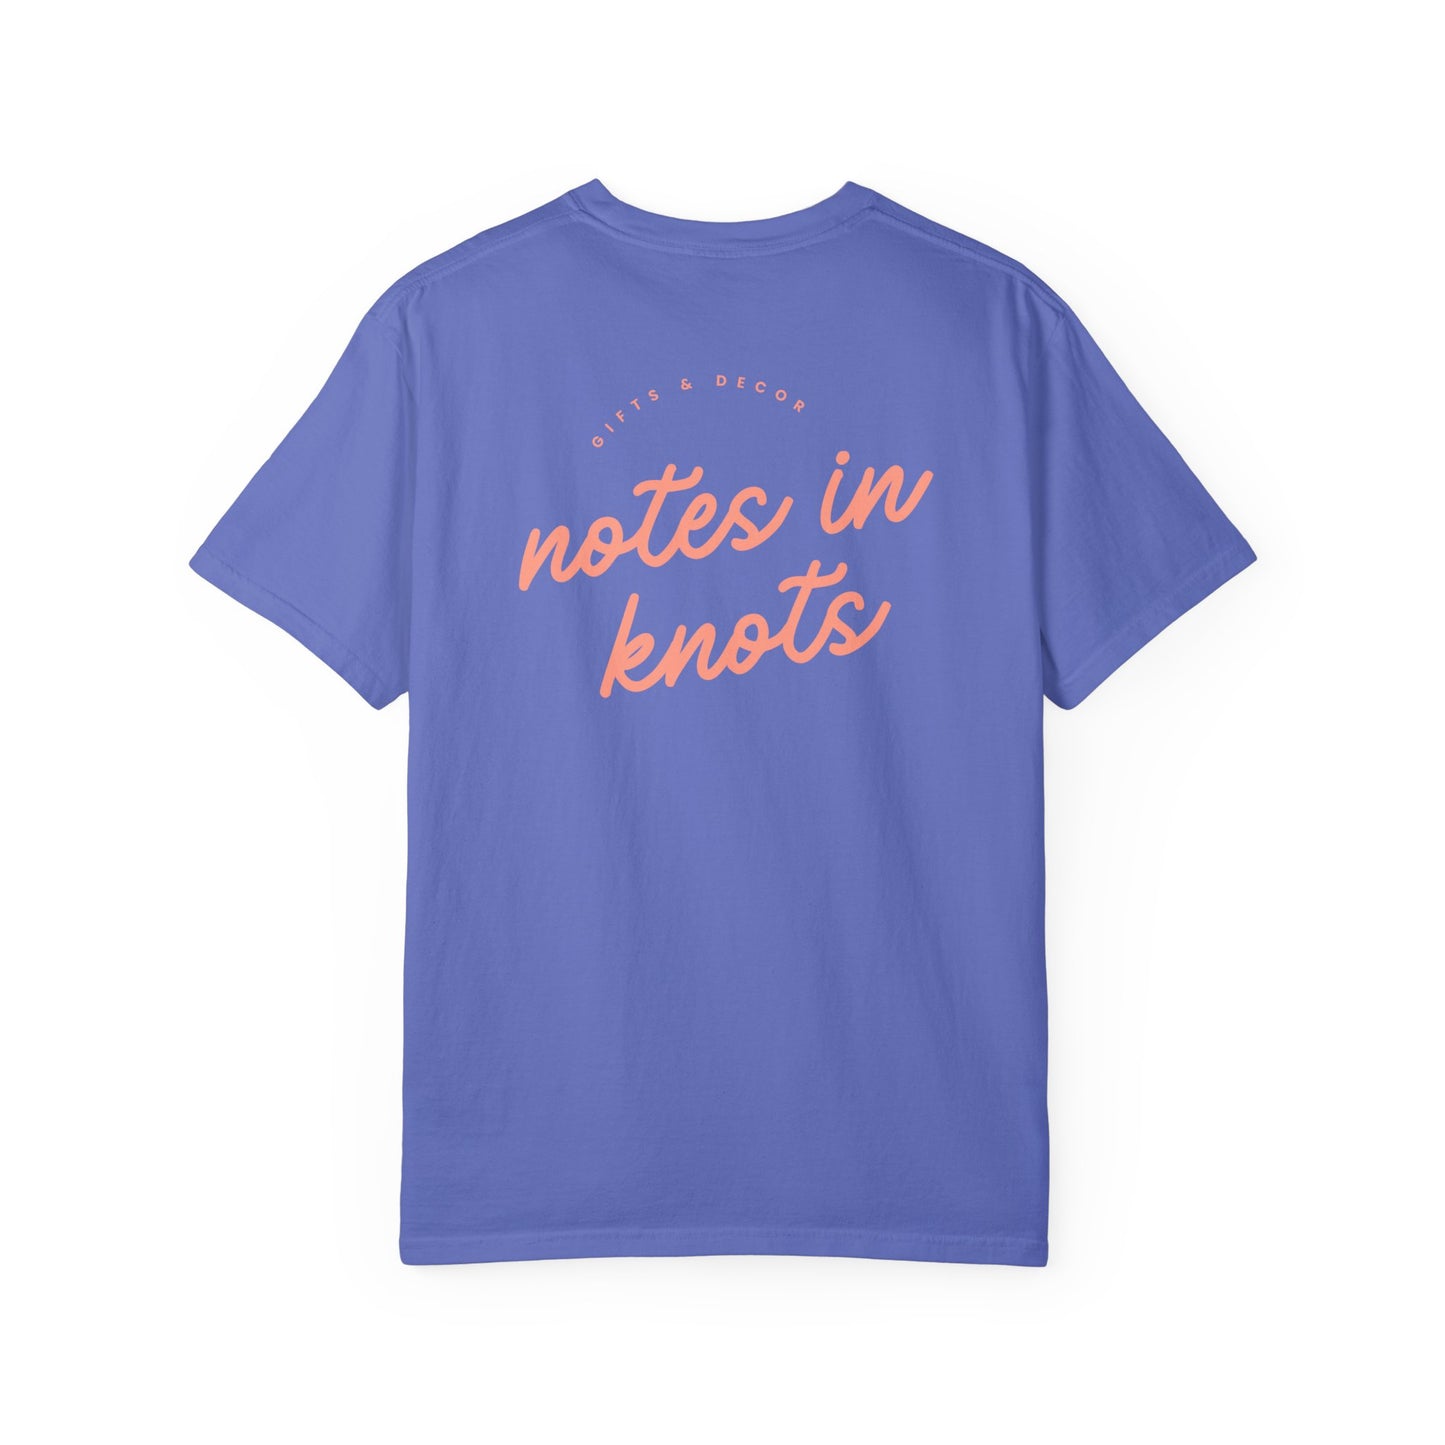 Notes in Knots Tshirt